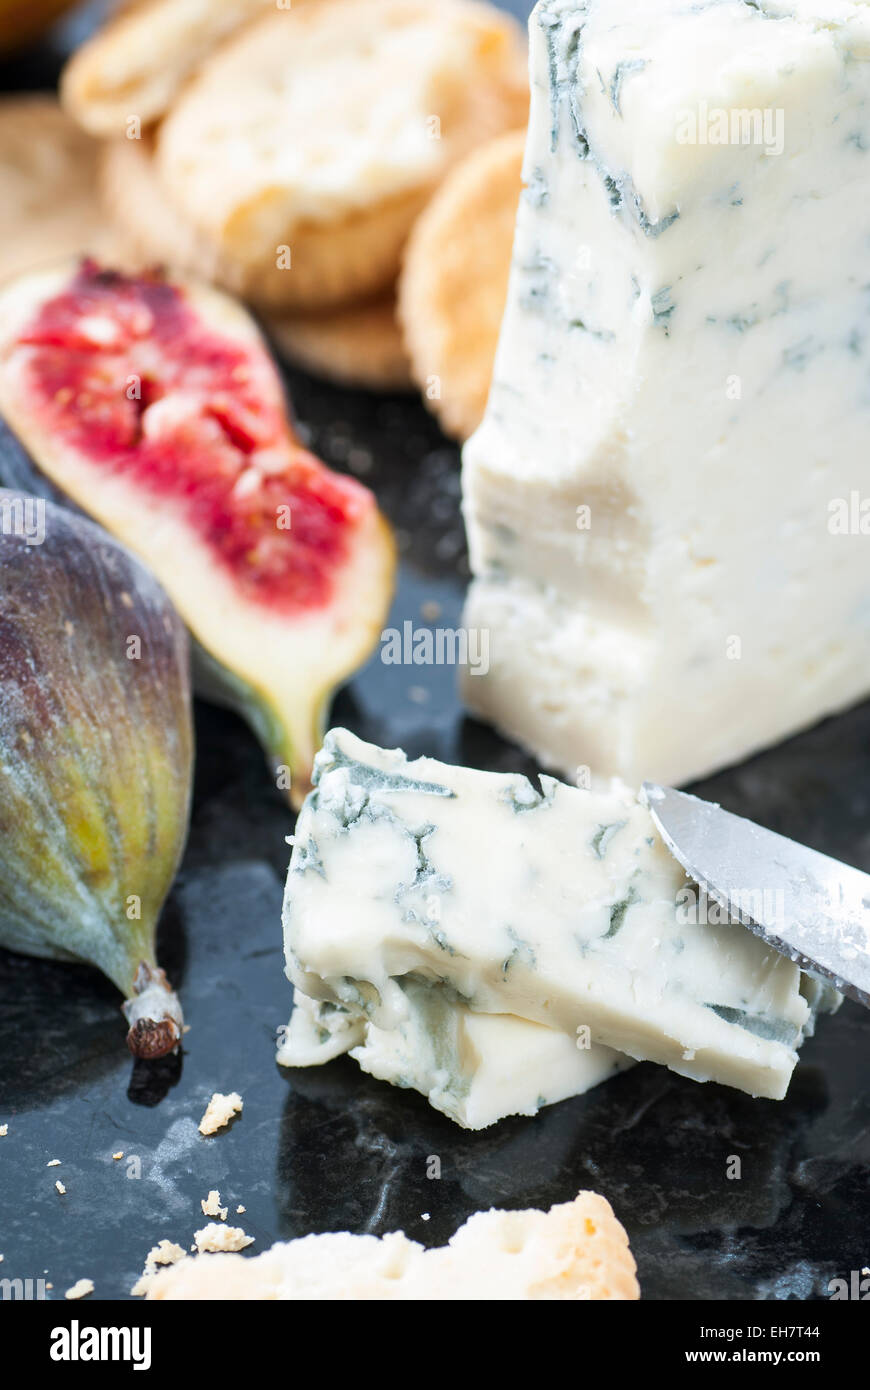 Cheese board with blue cheese, crackers and figs. Stock Photo